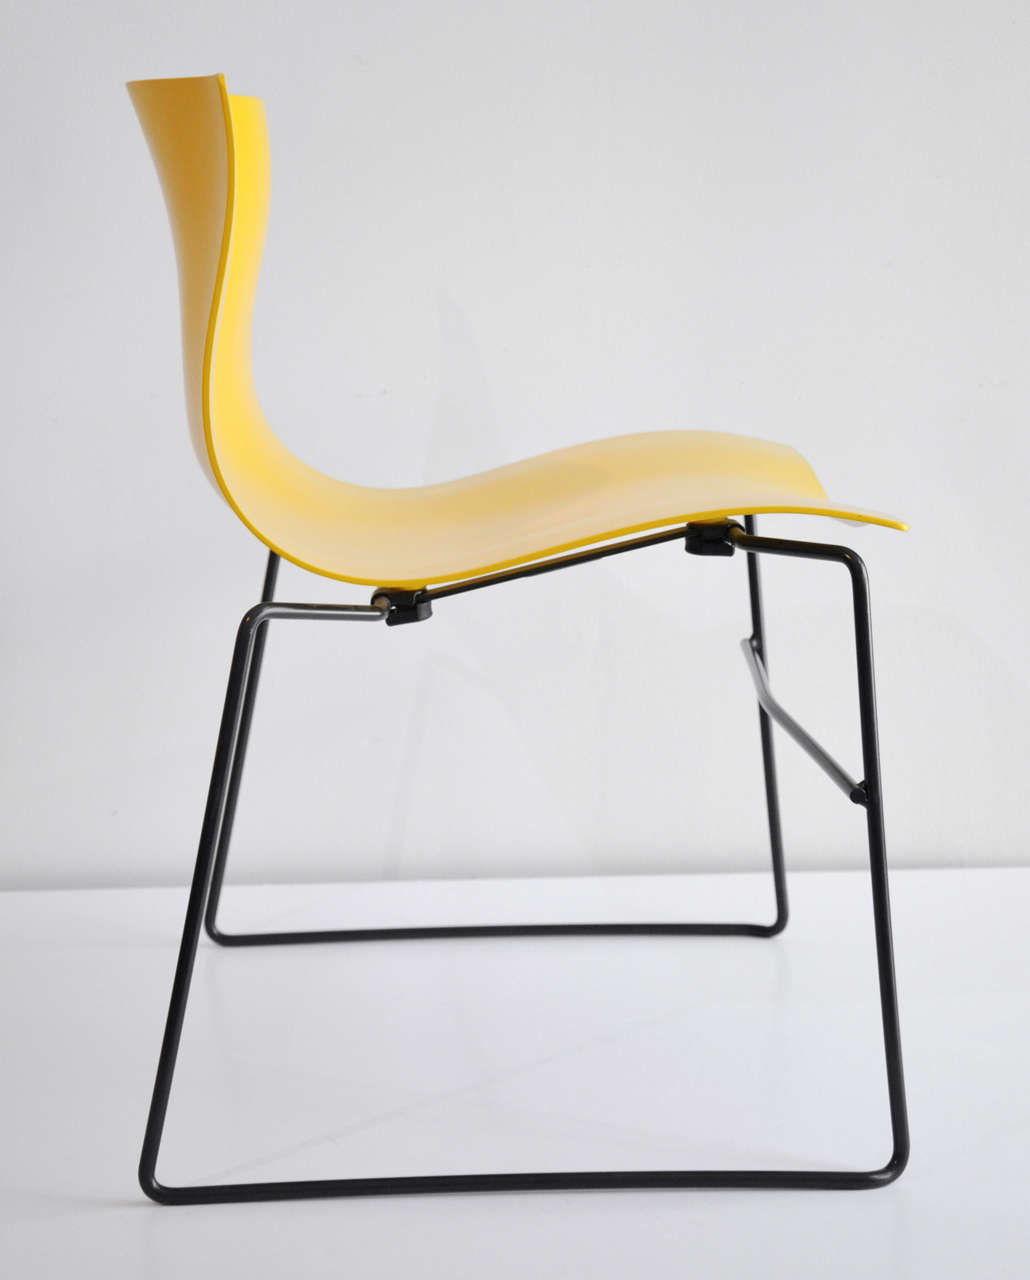 A pair of yellow handkerchief chairs designed by Massimo and Lella Vignelli for Knoll Studio.  This ergonomically sculpted side chair was designed to resemble a windblown handkerchief. A very comfortable stacking chair. Both have Knoll metal labels